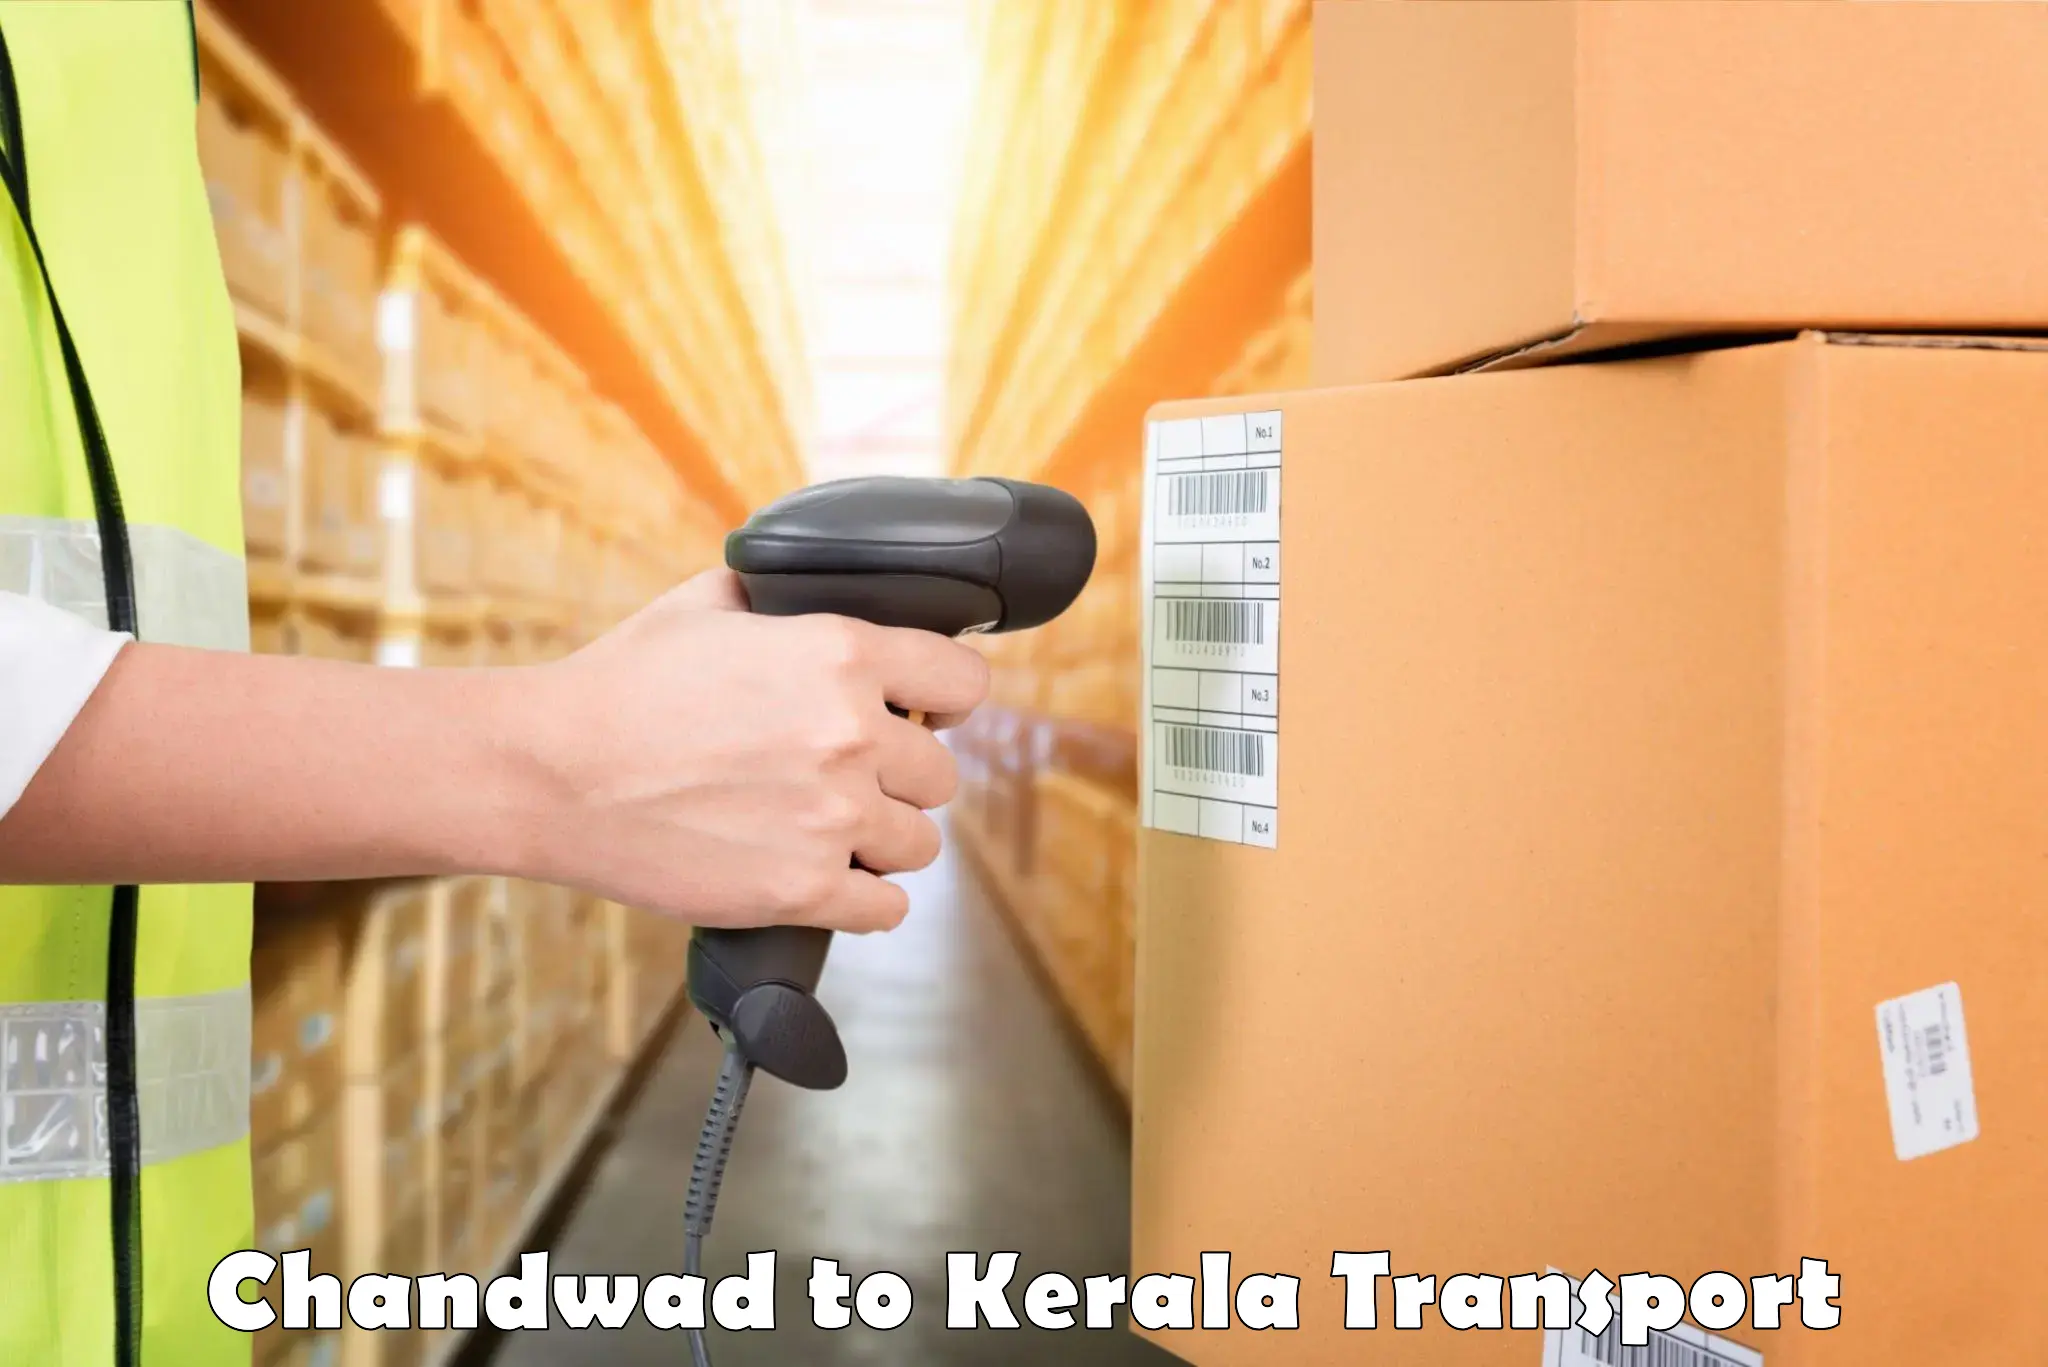 Package delivery services Chandwad to Kochi